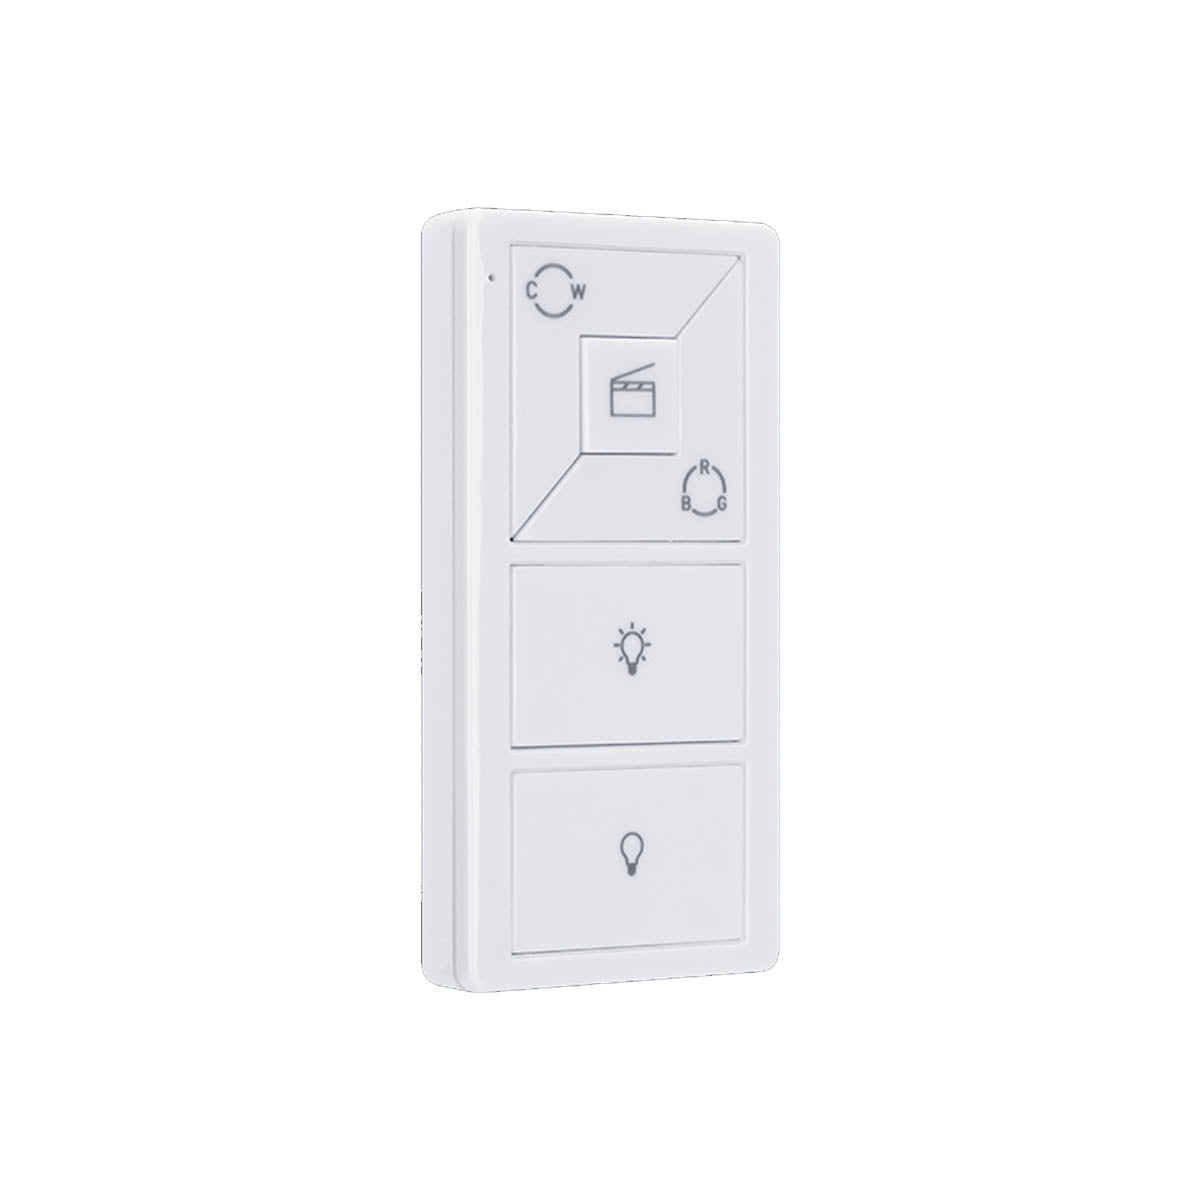 Spektrum Wireless Smart Switch Controller (Wall-plate Not Included)